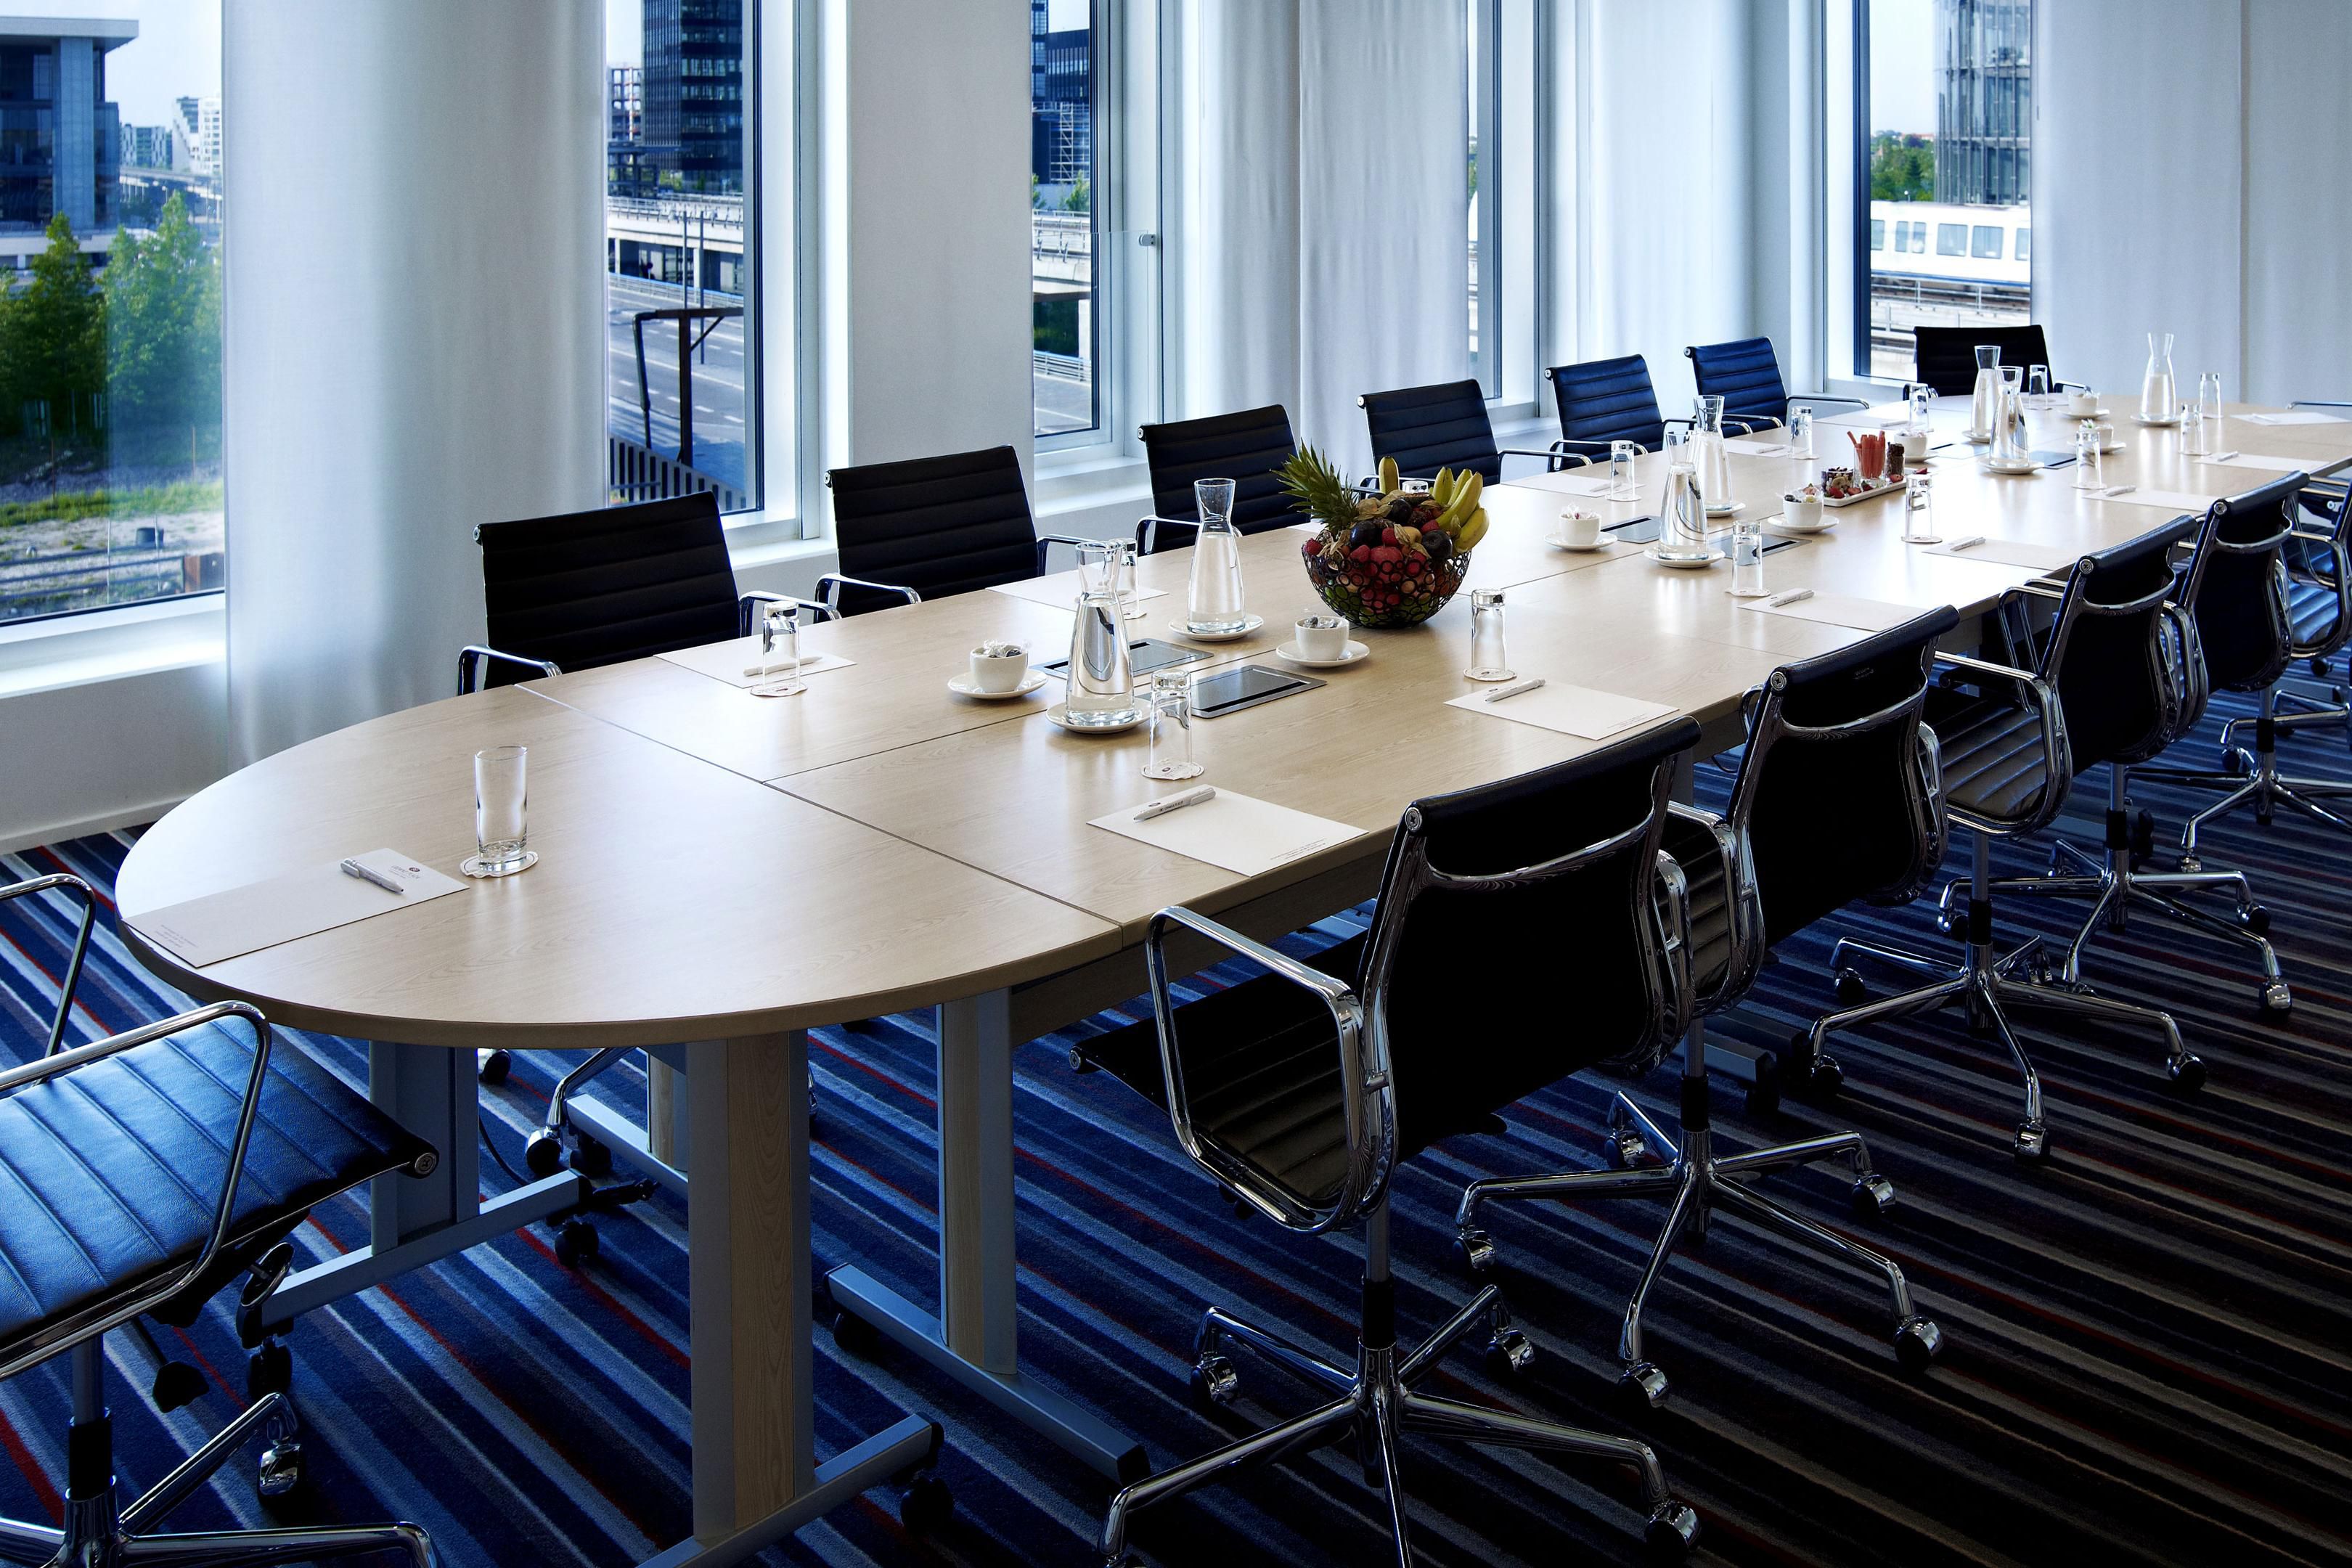 Meeting rooms and group rooms with space for 5-90 participants